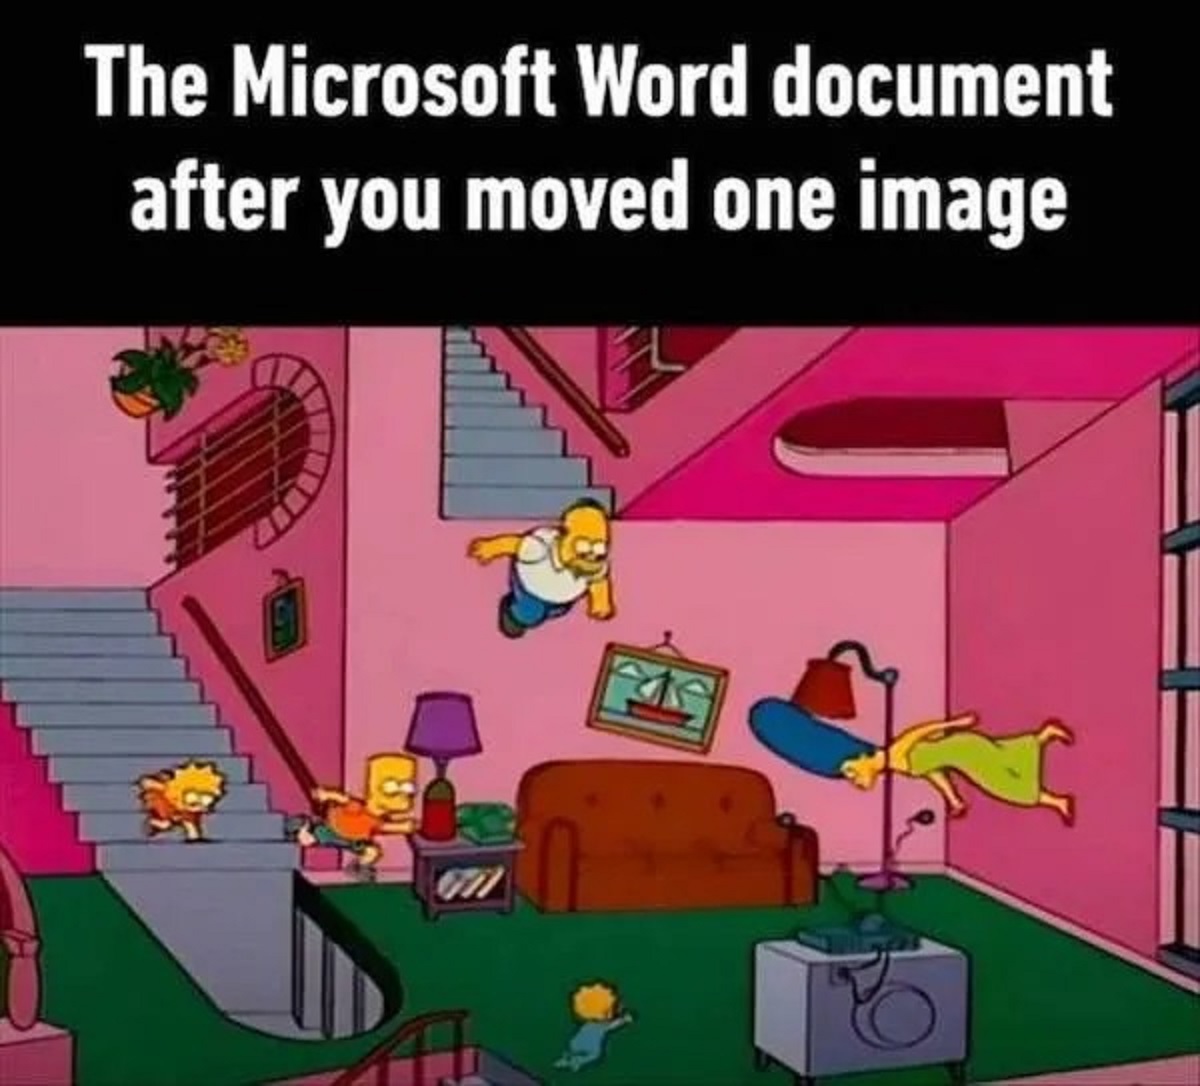 microsoft word document after you moved one - The Microsoft Word document after you moved one image